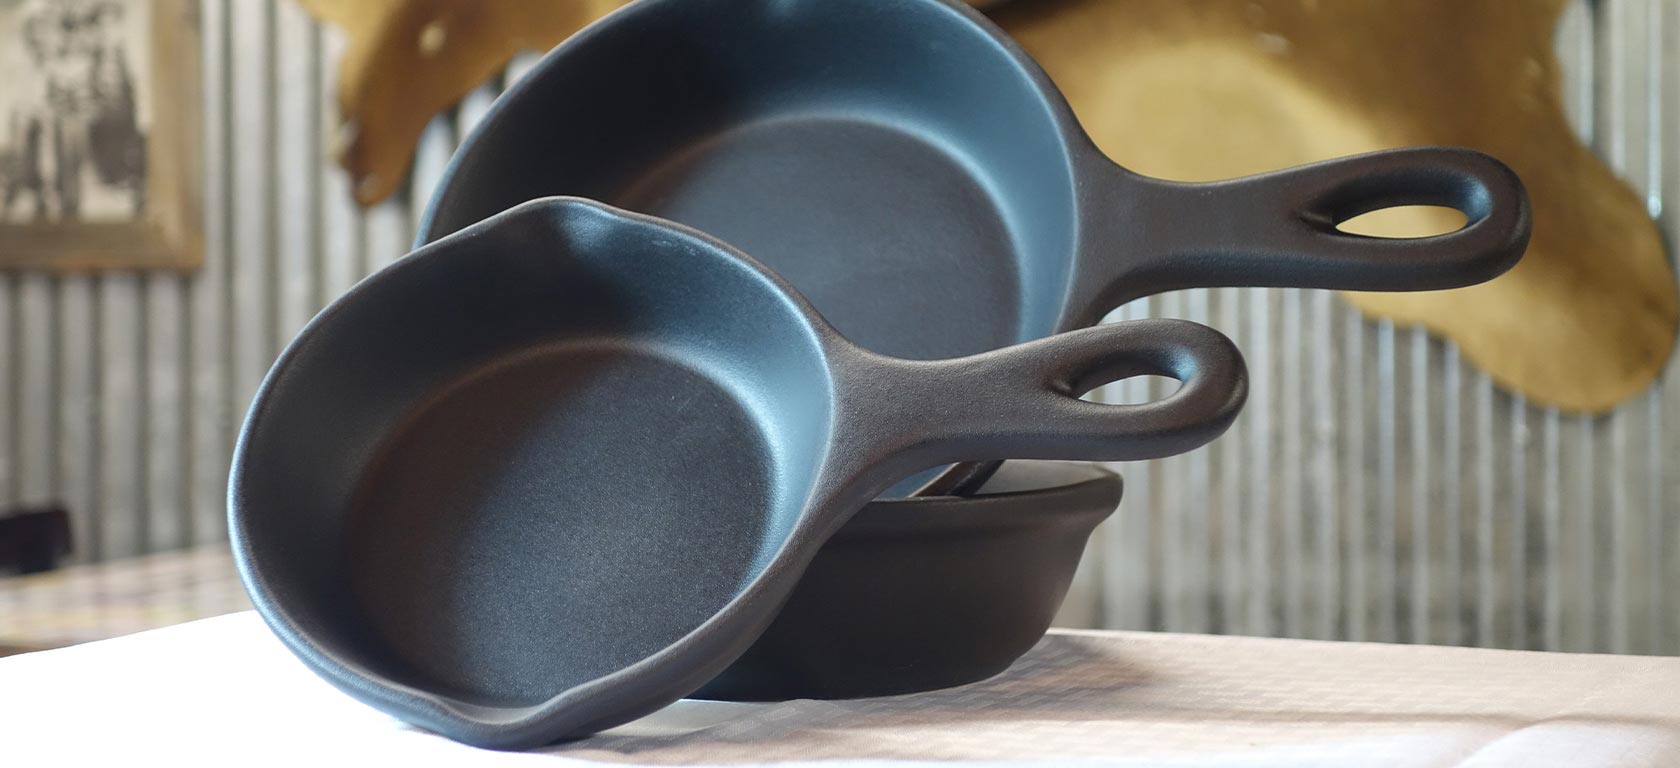 Large and small black ceramic griddles and pans.